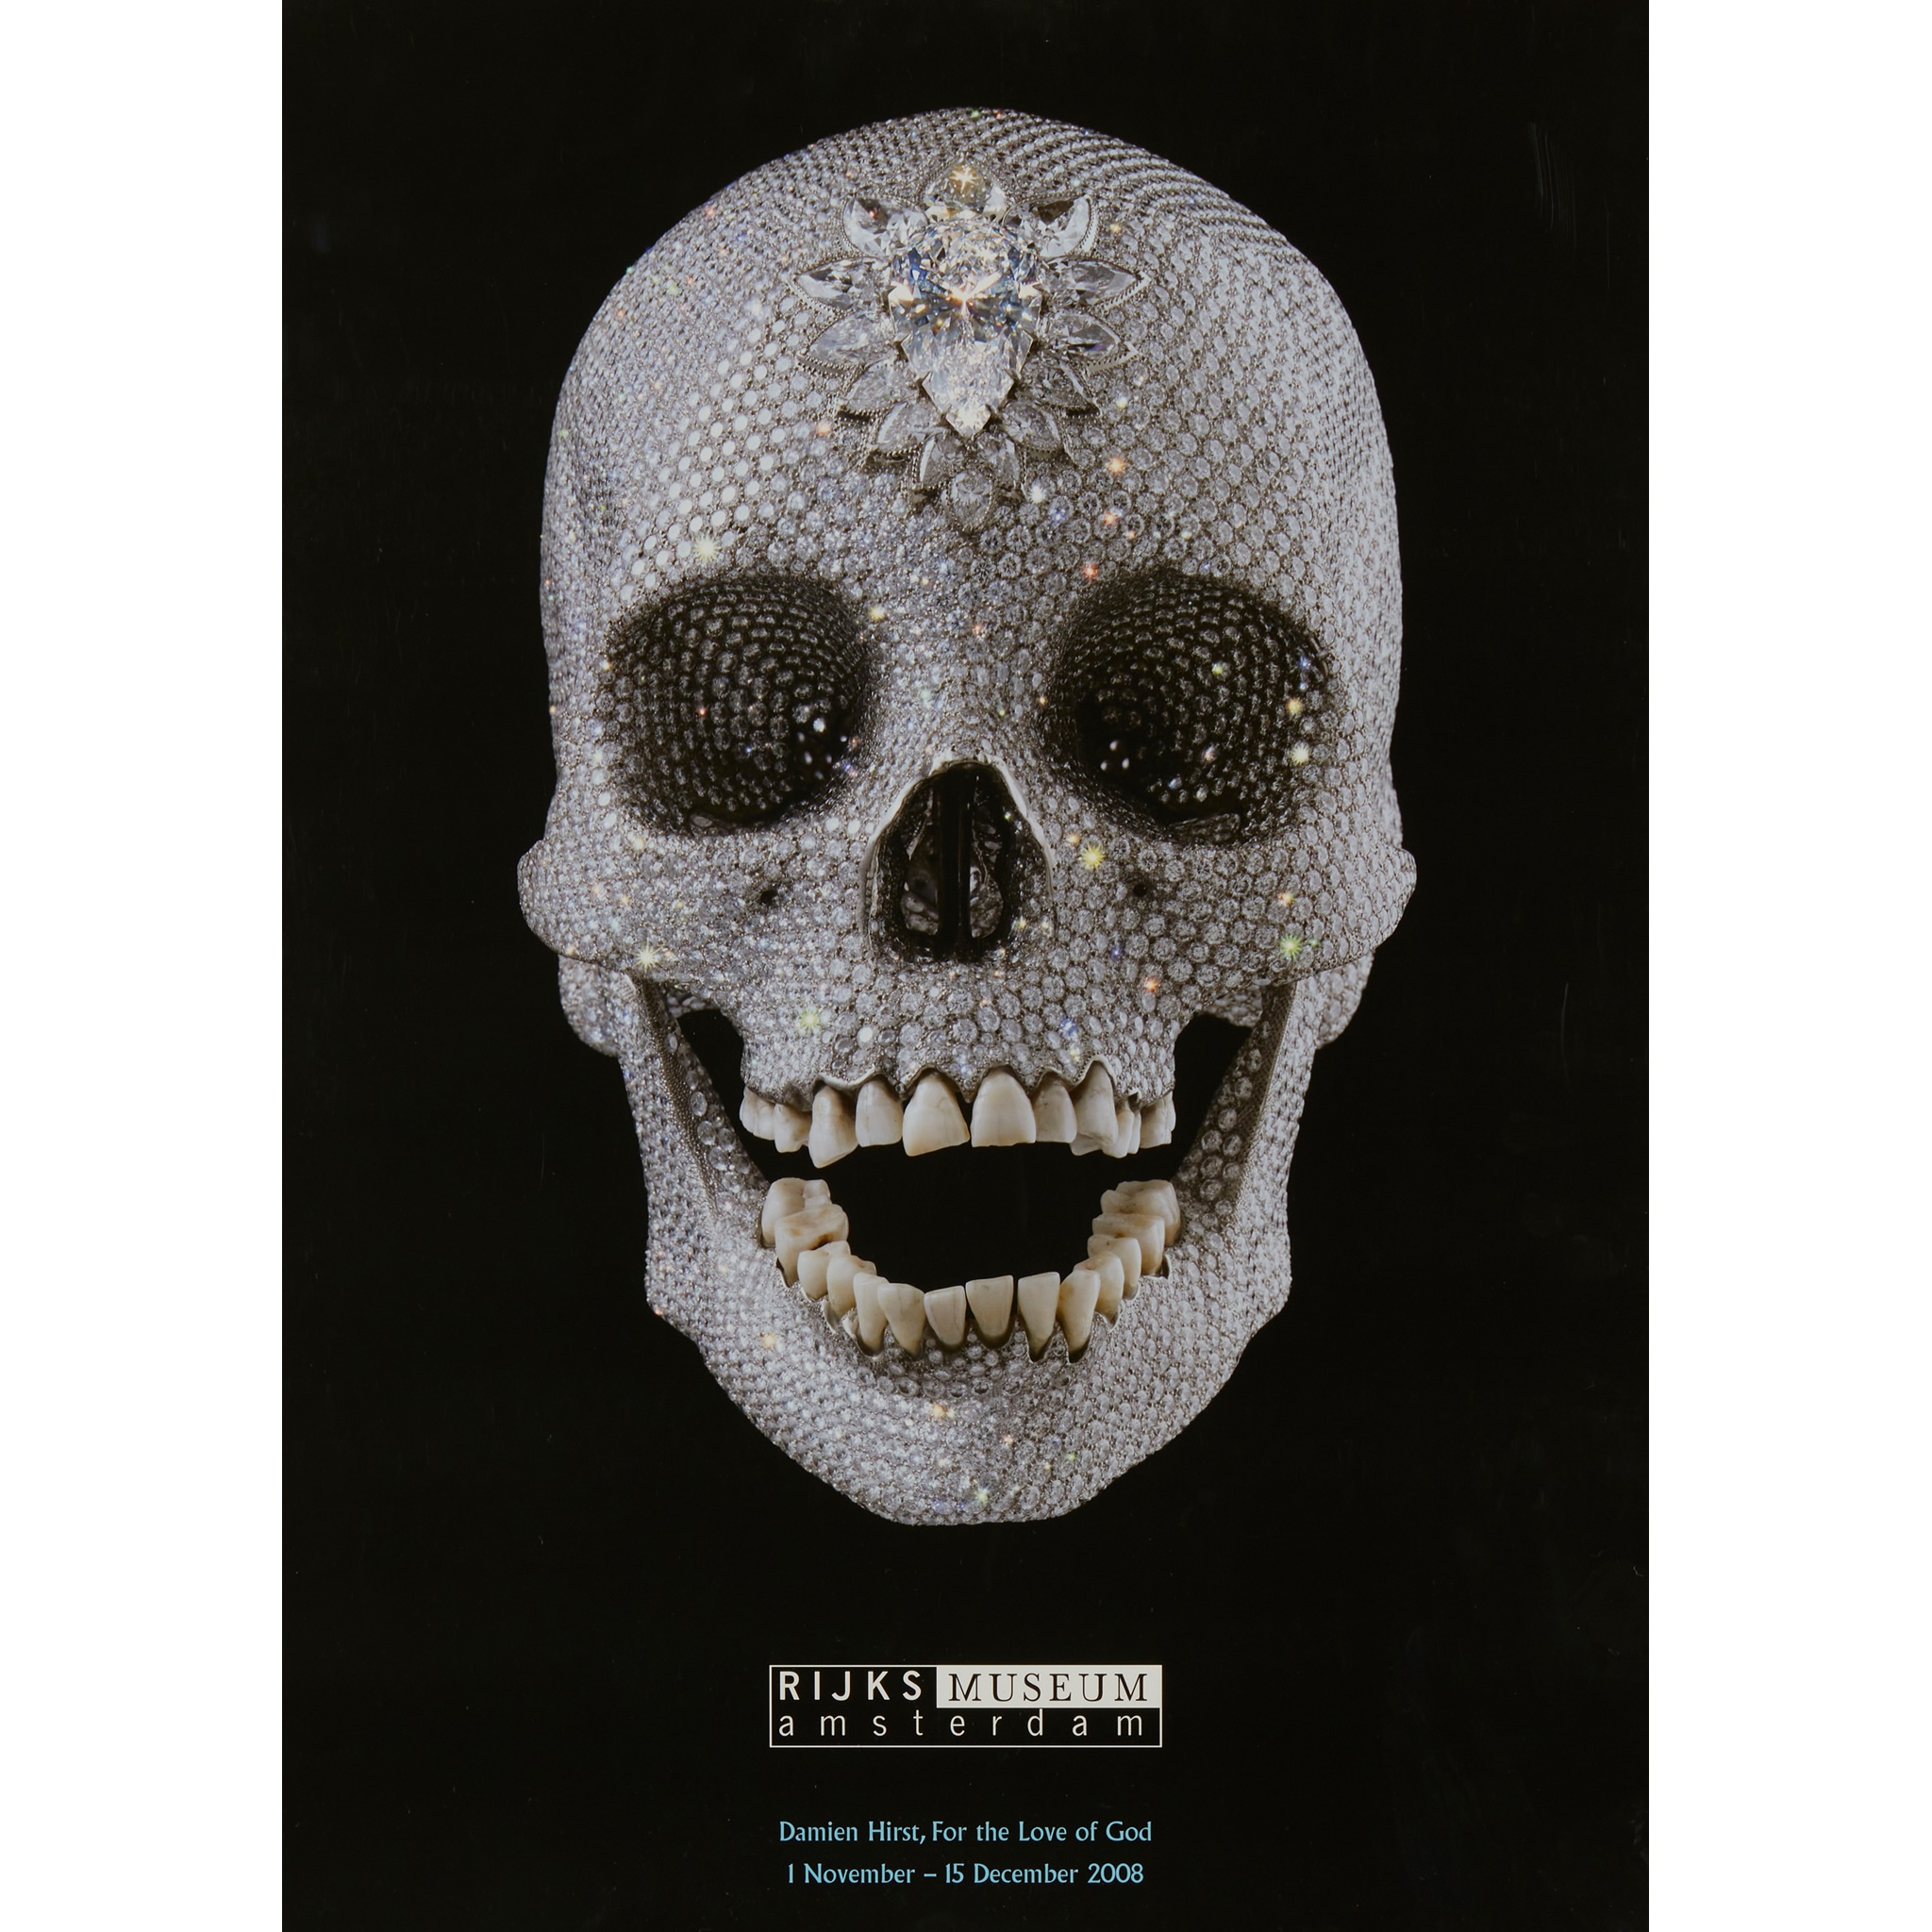 § DAMIEN HIRST (BRITISH 1965-) 'FOR THE LOVE OF GOD' EXHIBITION POSTER